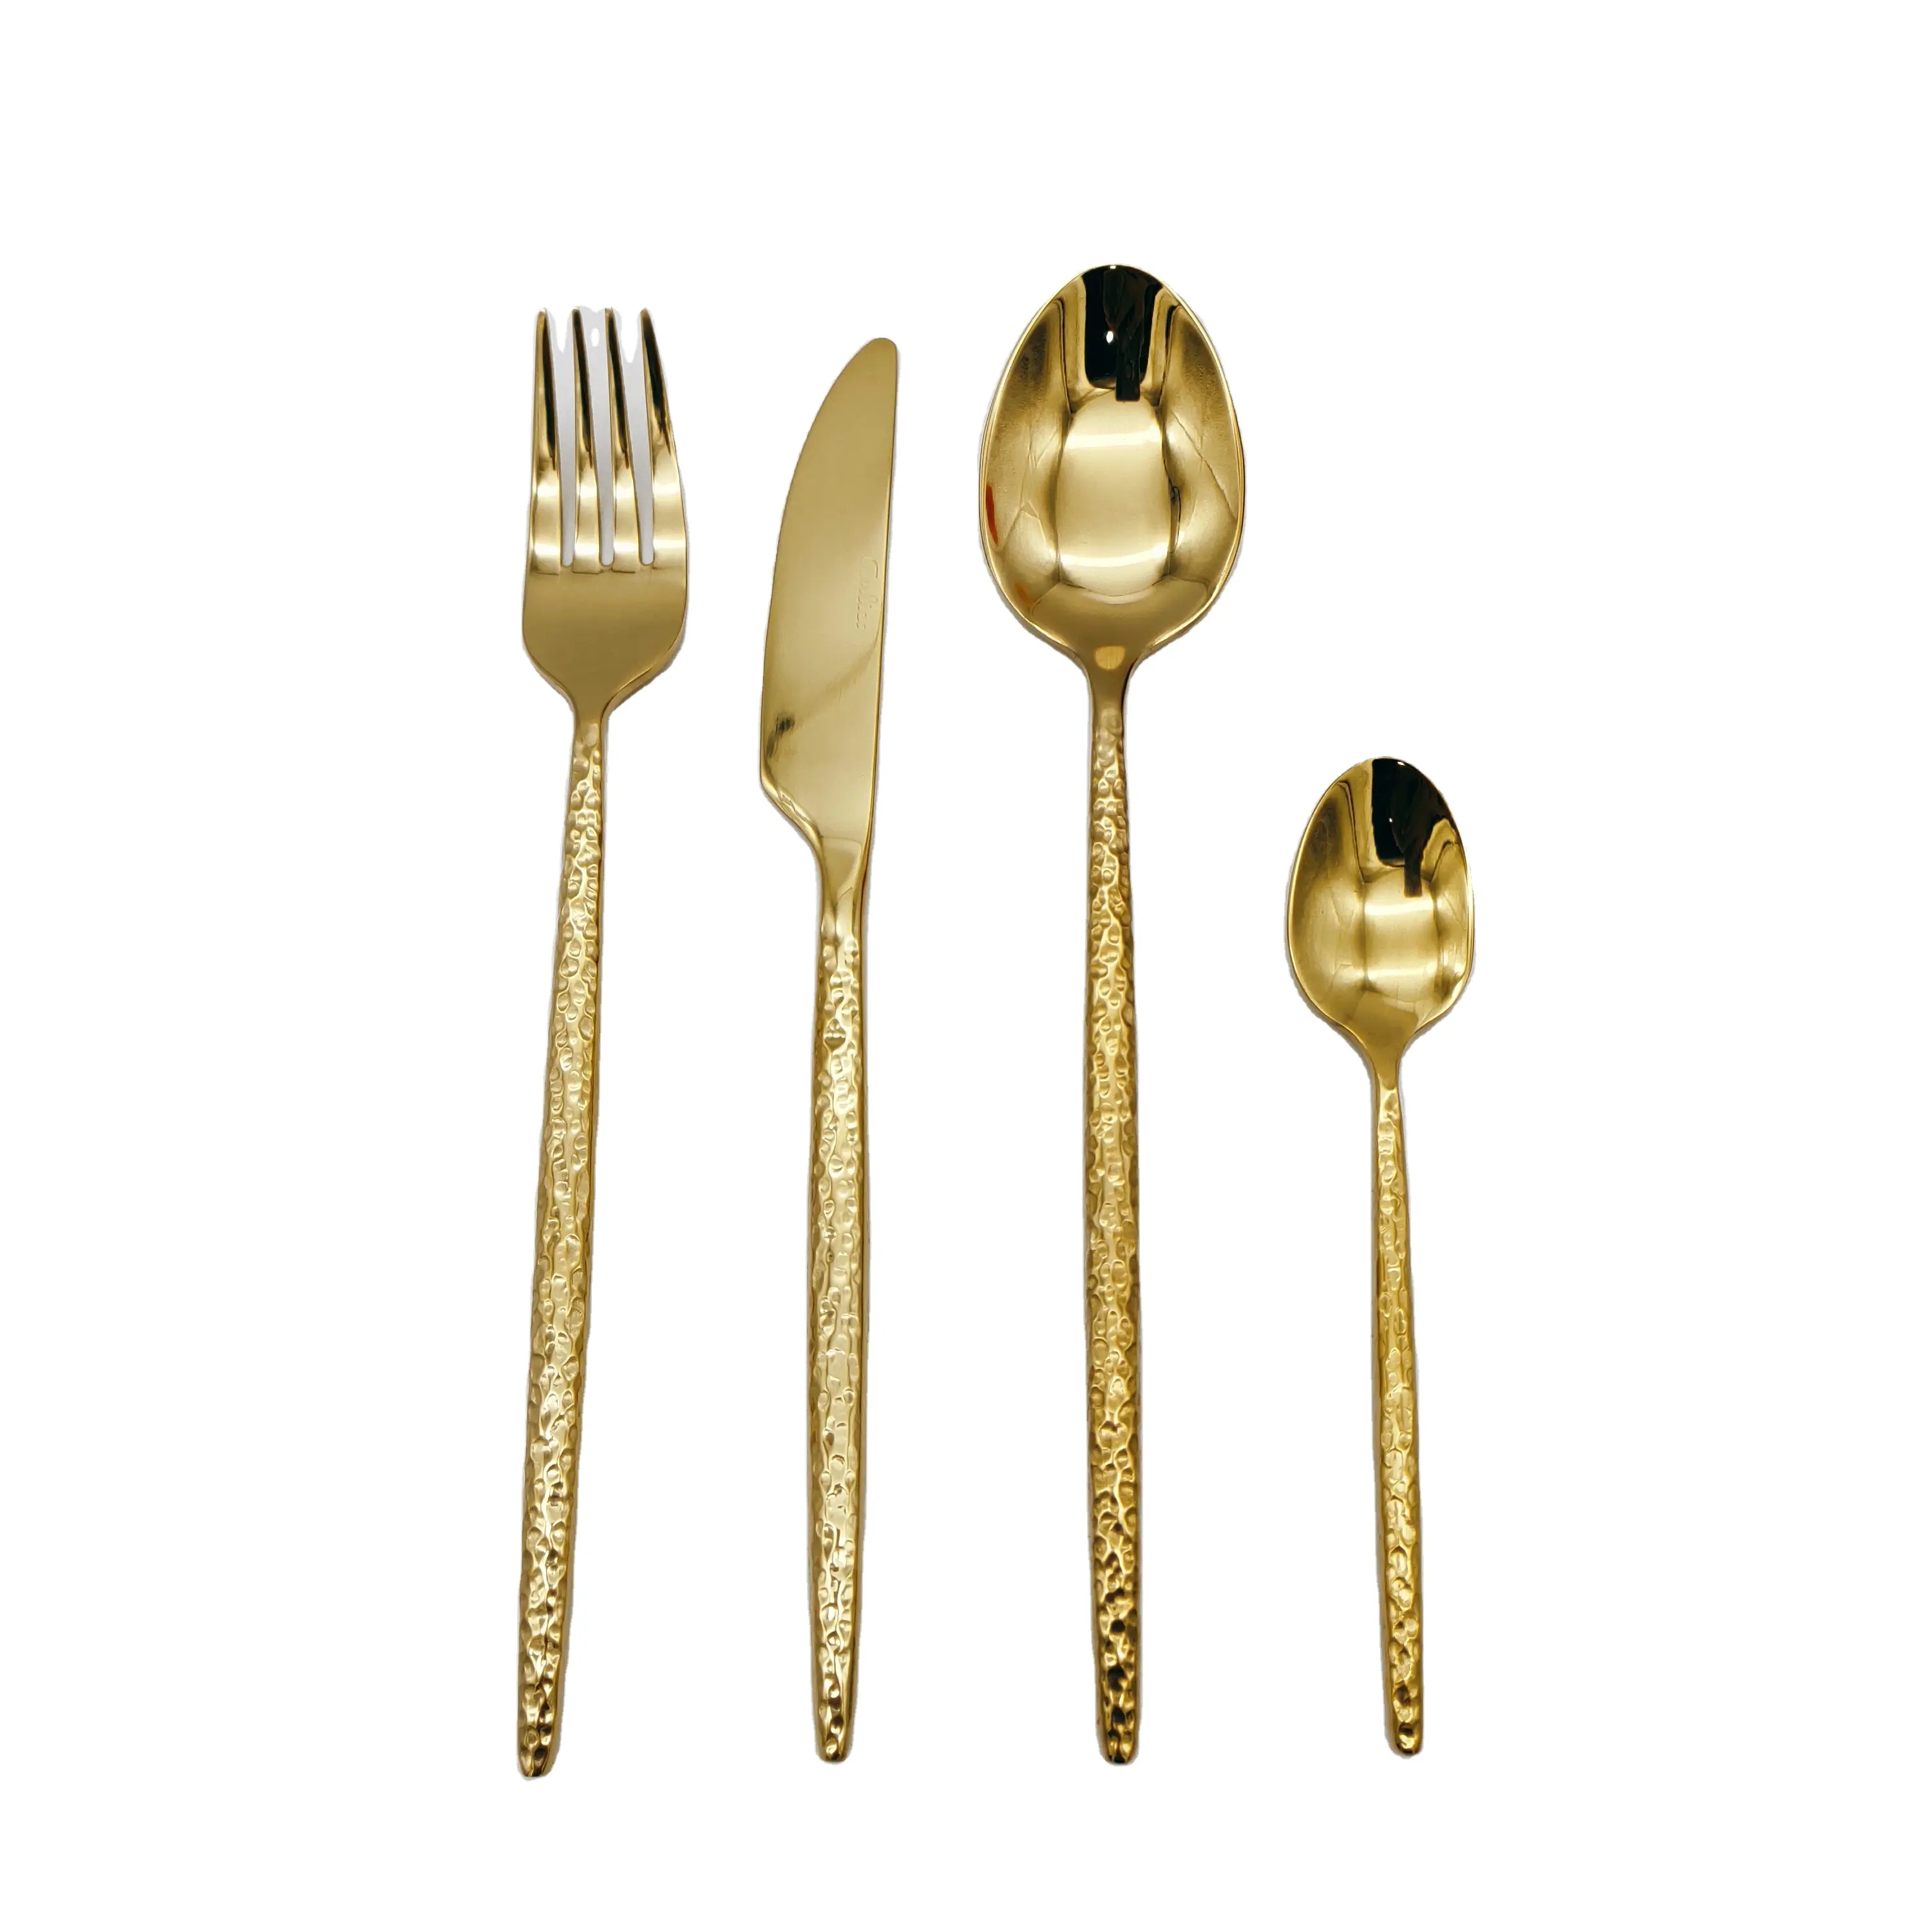 Allahome Luxury cutlery Hammer handle flatware hotel cutlery gold event cutlery set